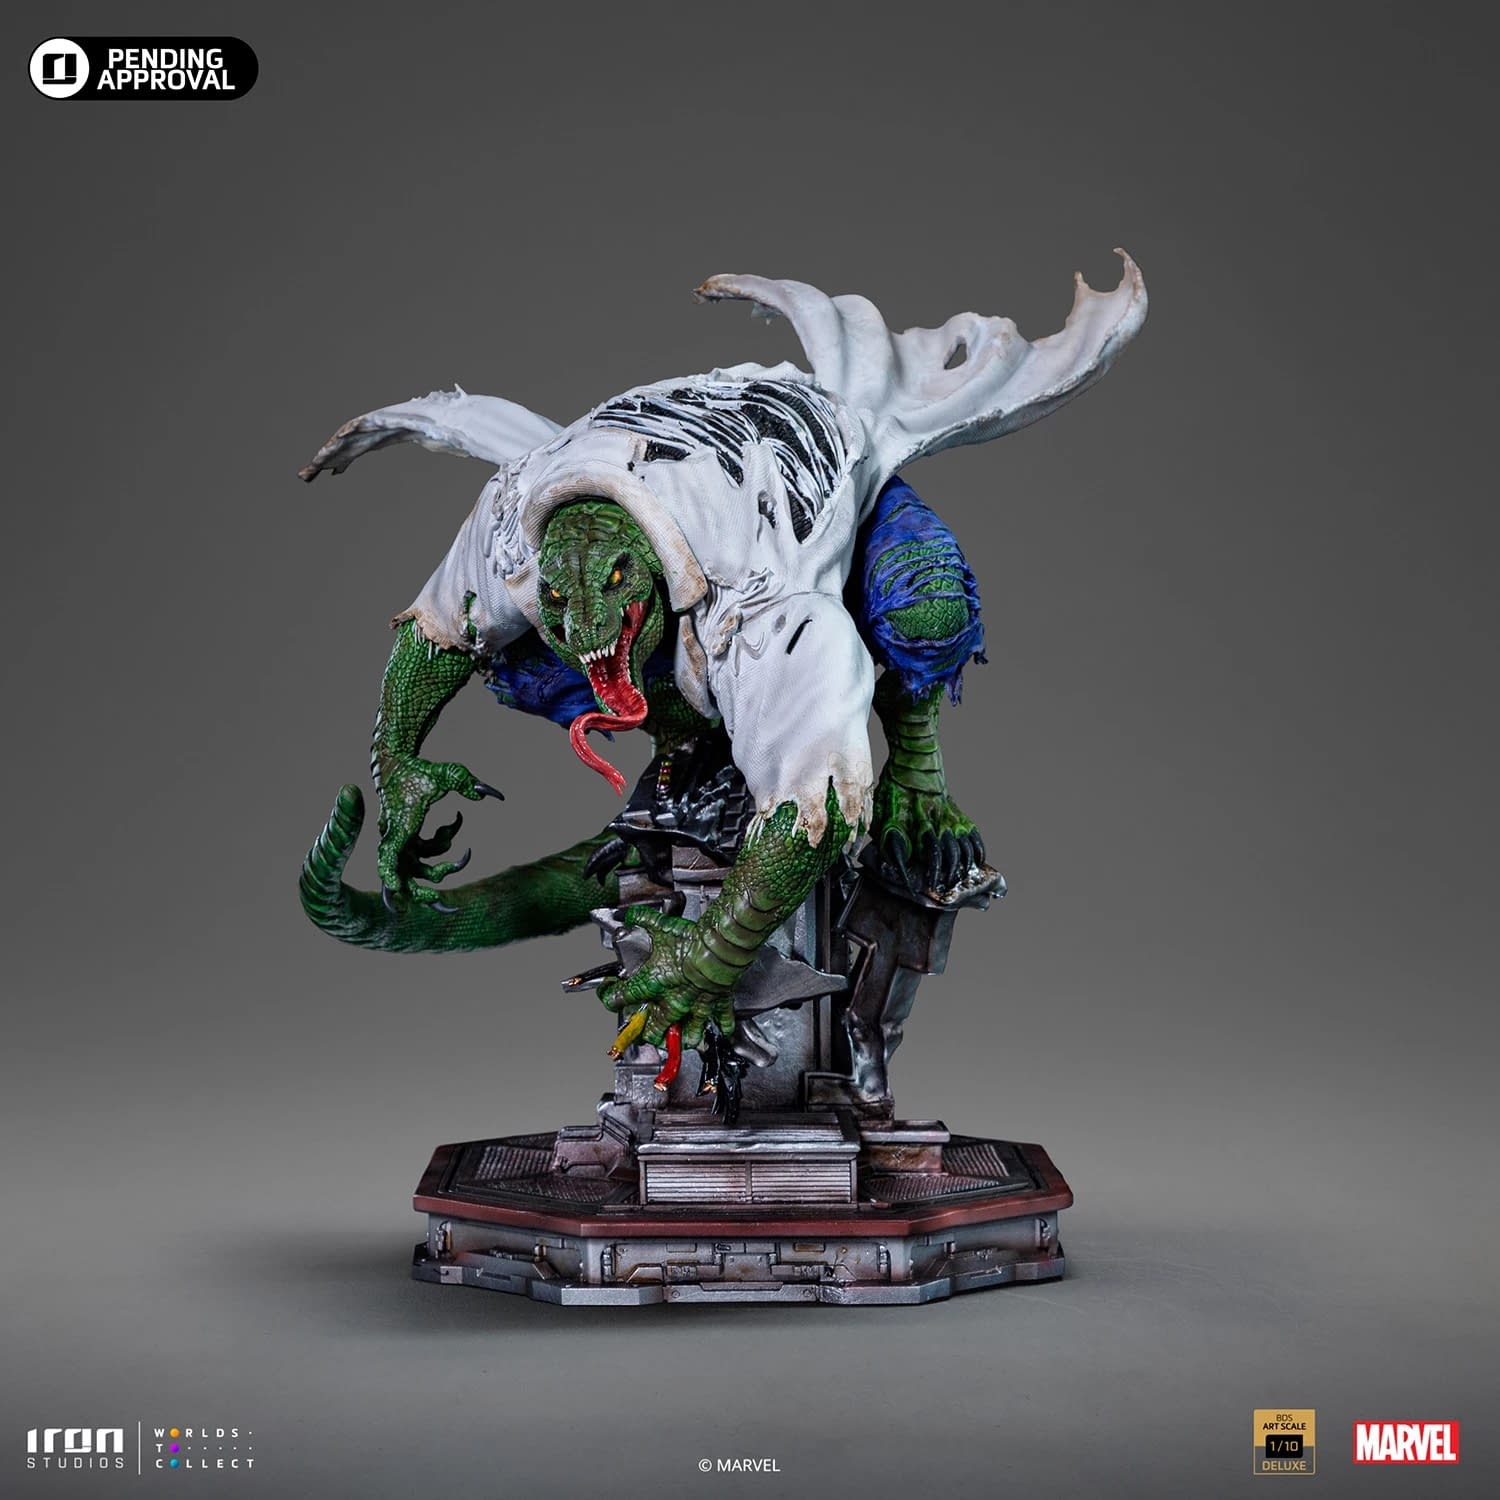 Spider-Man vs. Villains The Lizard Diorama Revealed by Iron Studios2